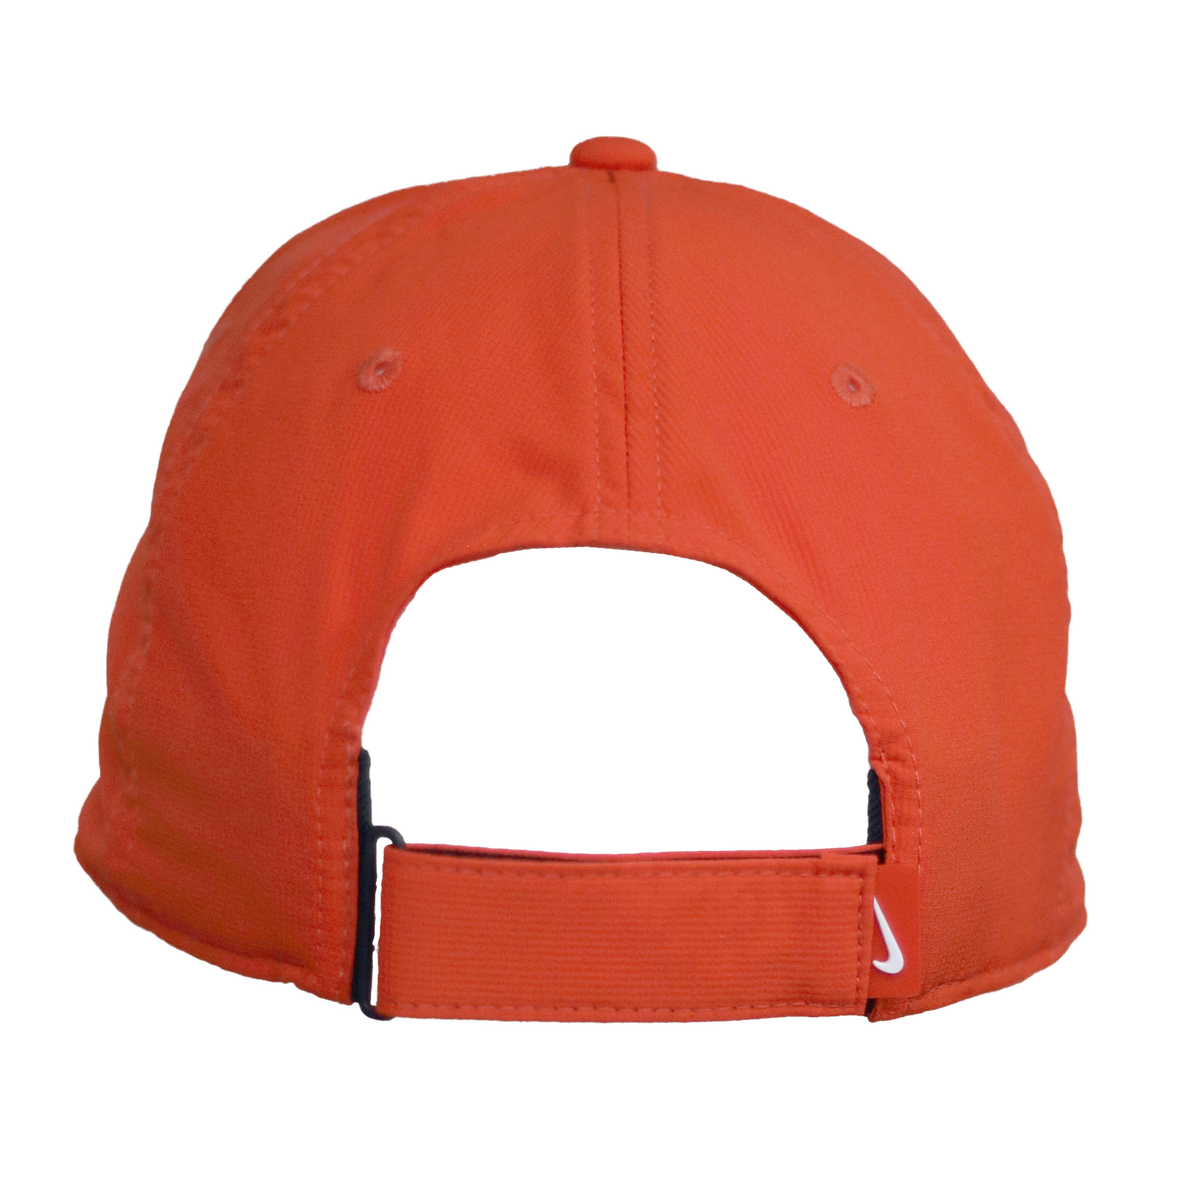 Nike Clemson Adjustable Dri-Fit Hat with Paw